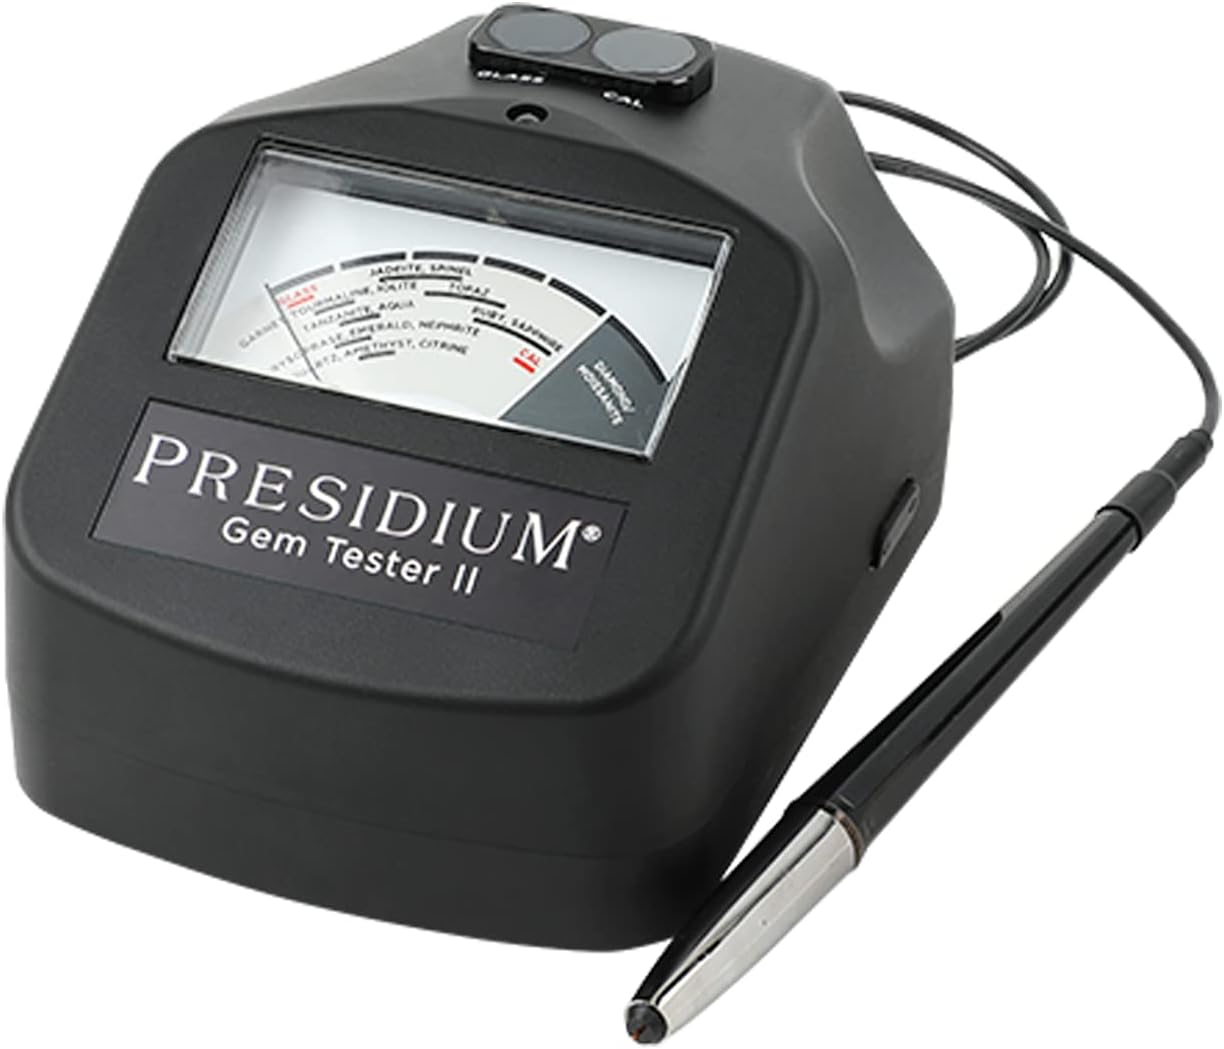 Presidium Instruments Gem Tester II with Assisted Thermal Calibration